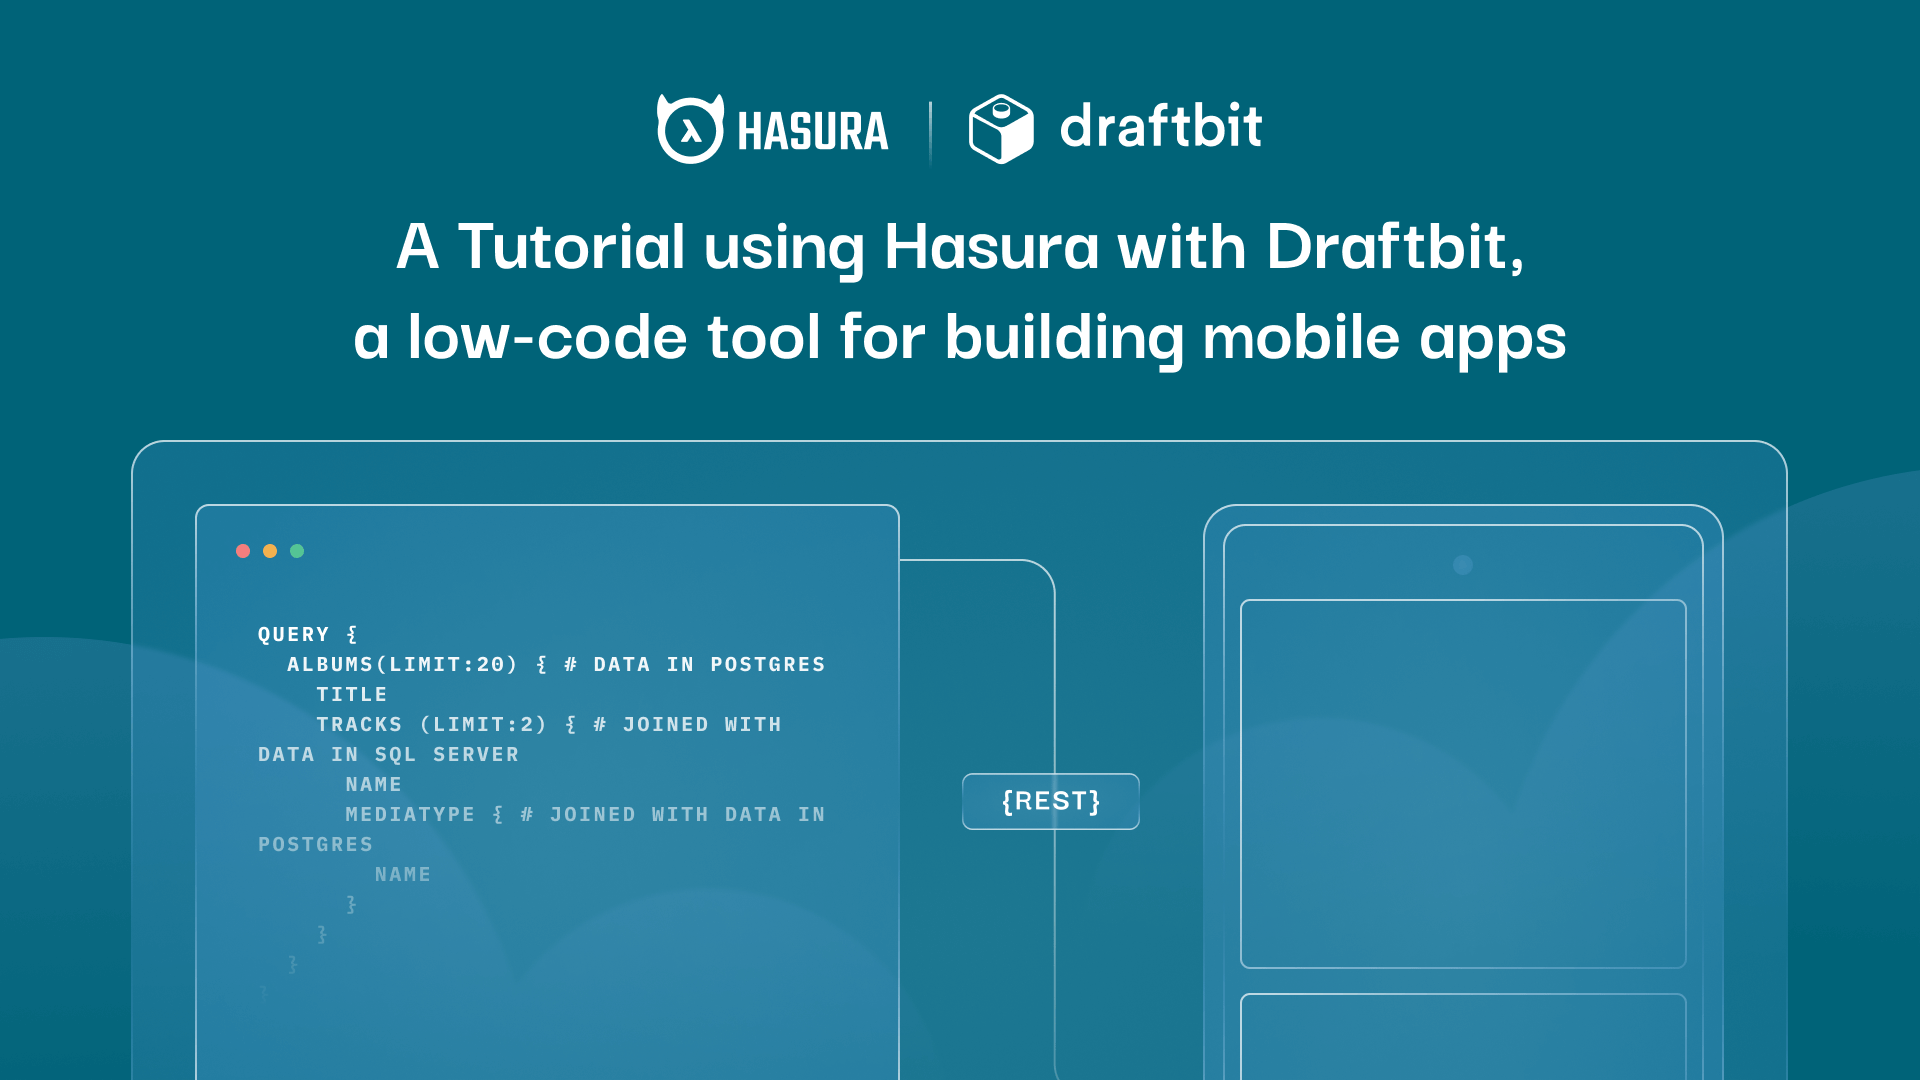 A Tutorial using Hasura with Draftbit, a low-code tool for building mobile apps